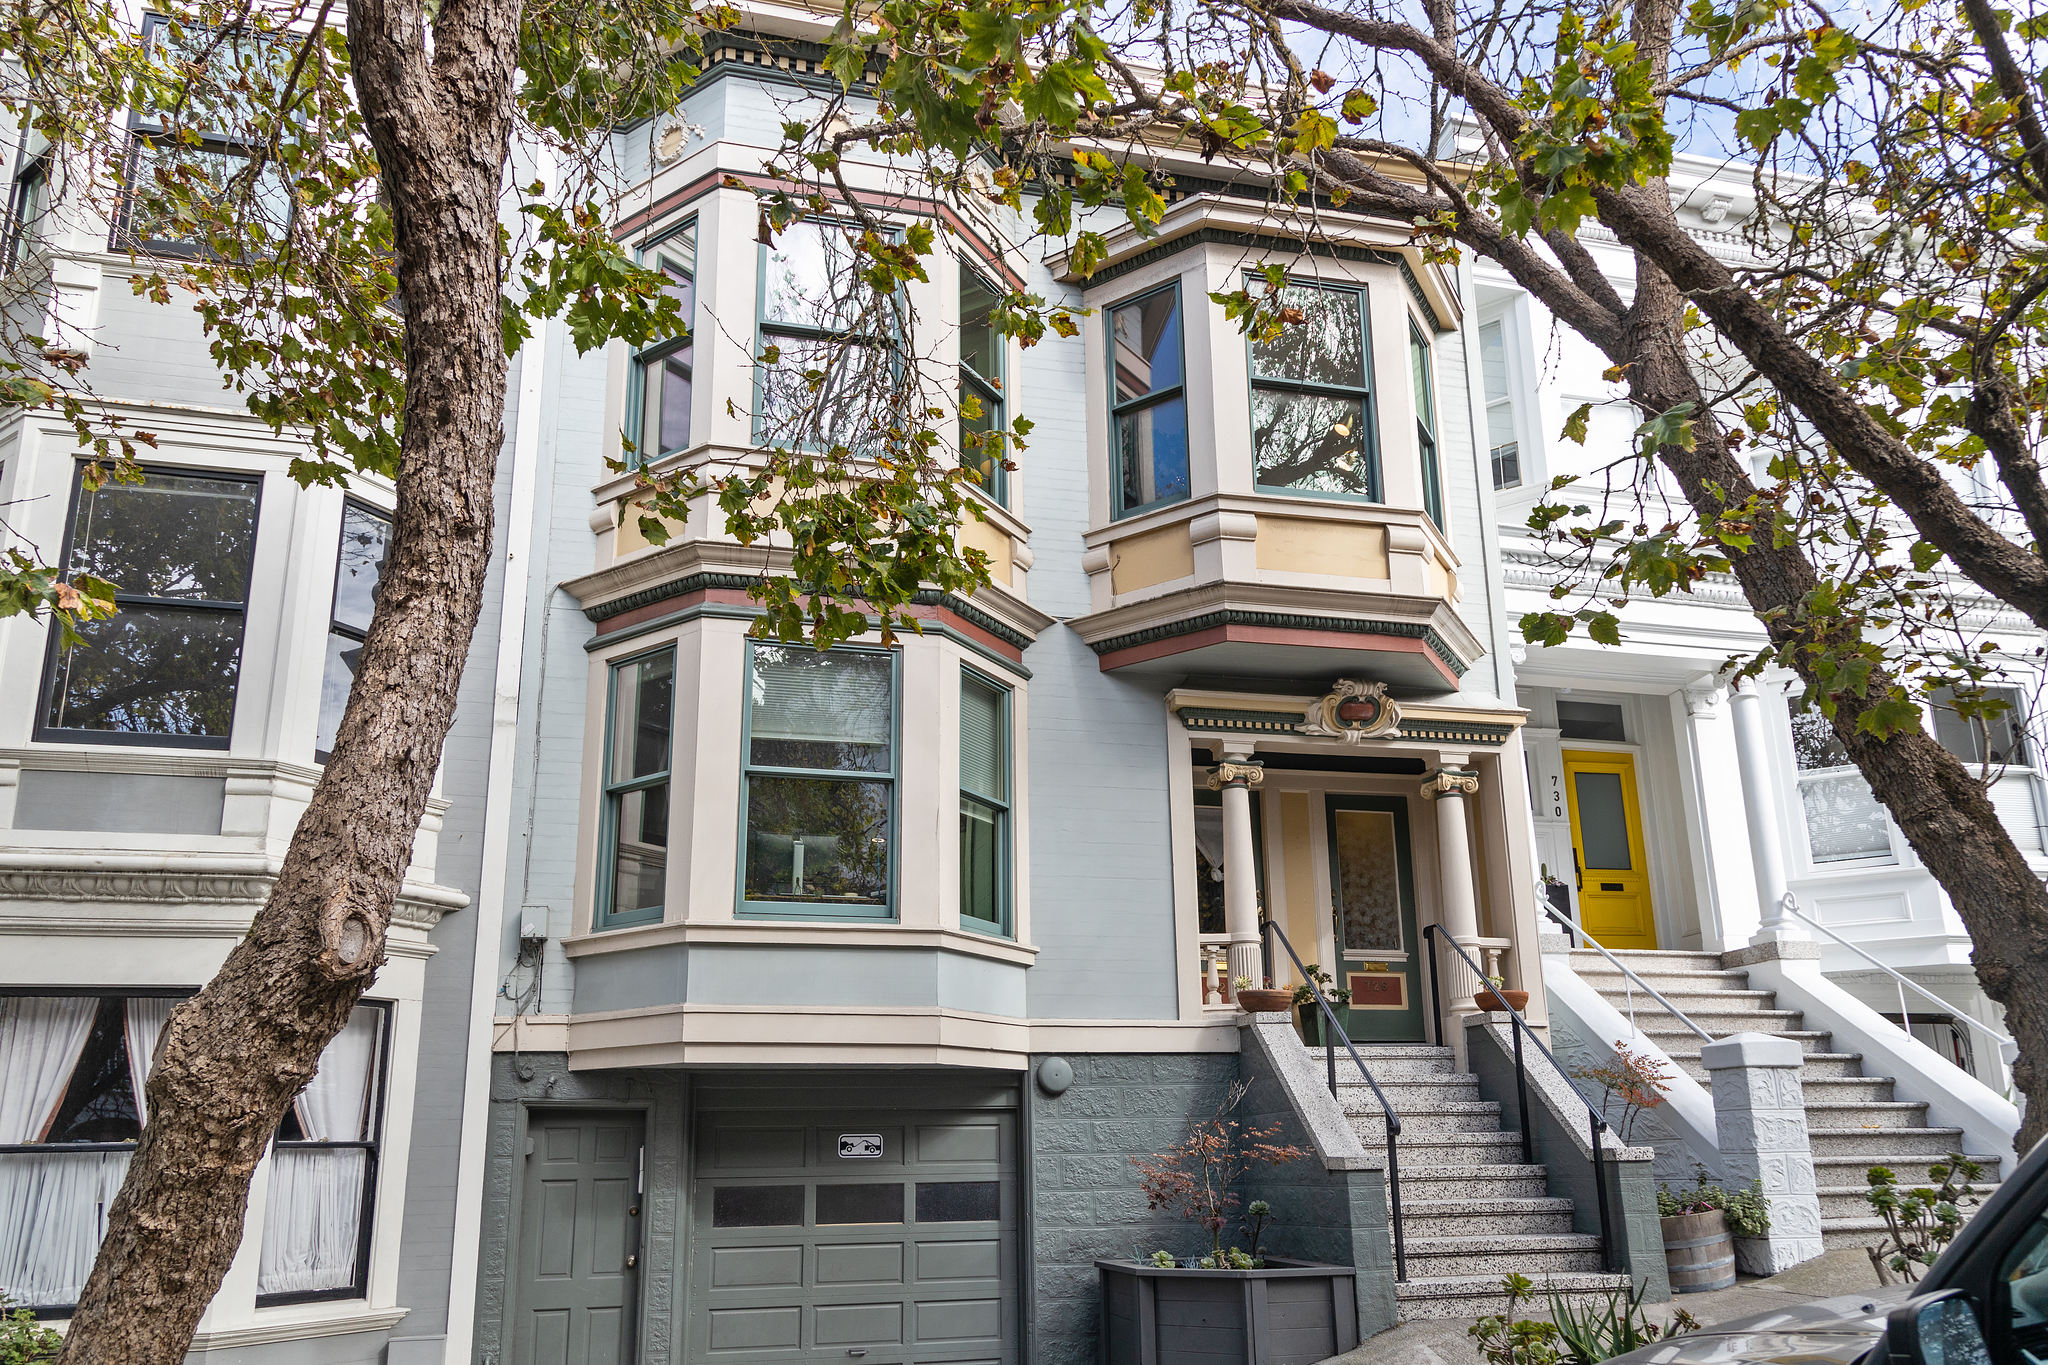 Property Photo: Exterior view of 726 Clayton Street, featuring a light blue Victorian home